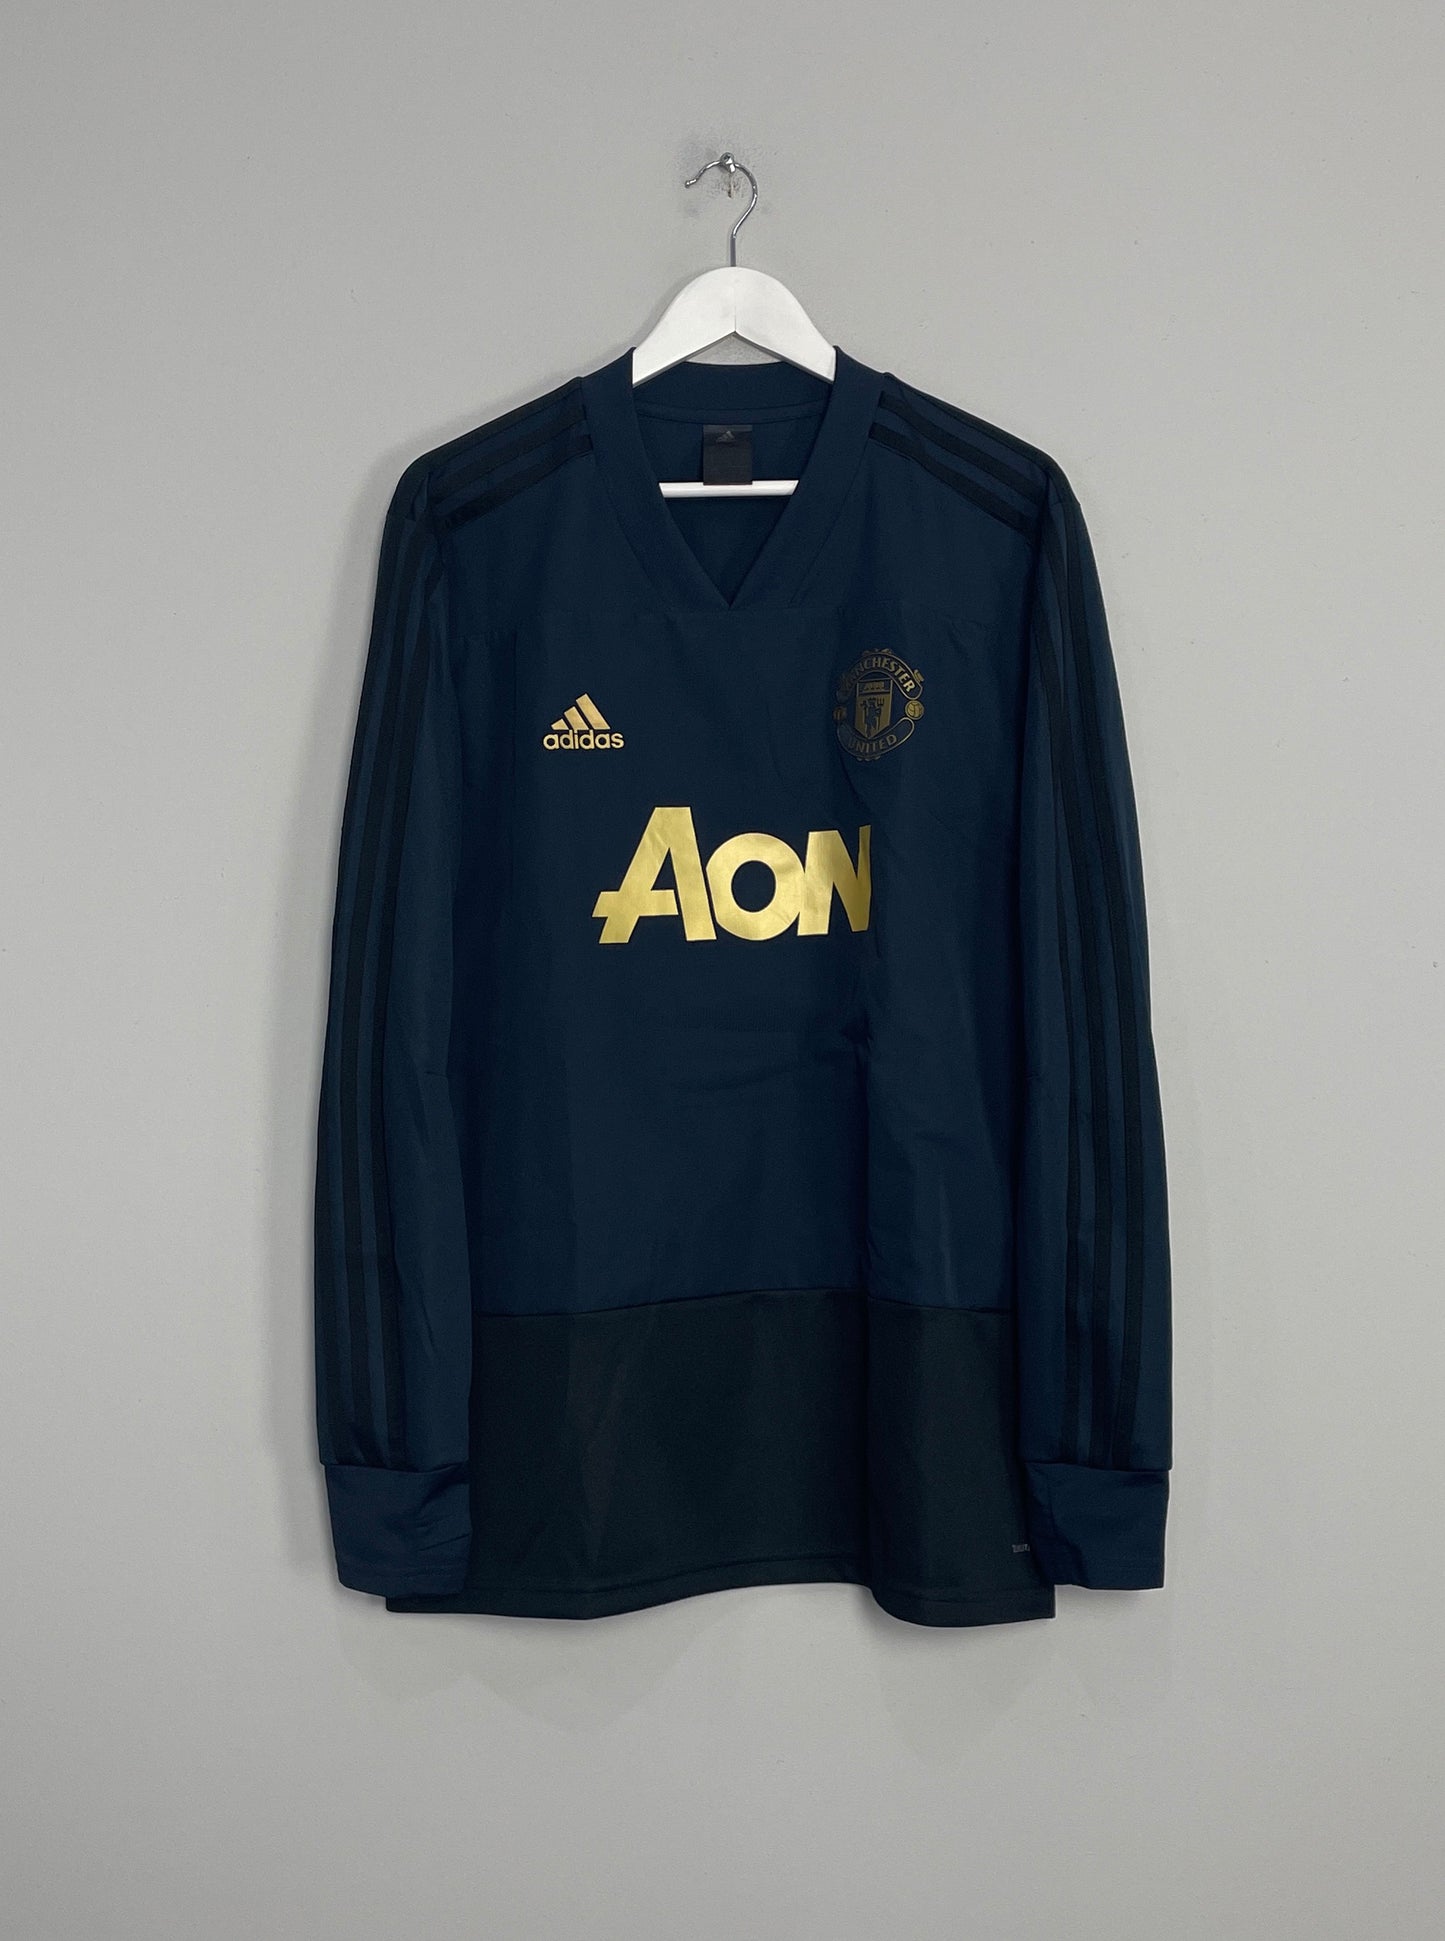 Image of the Manchester United jumper from the 2018/19 season